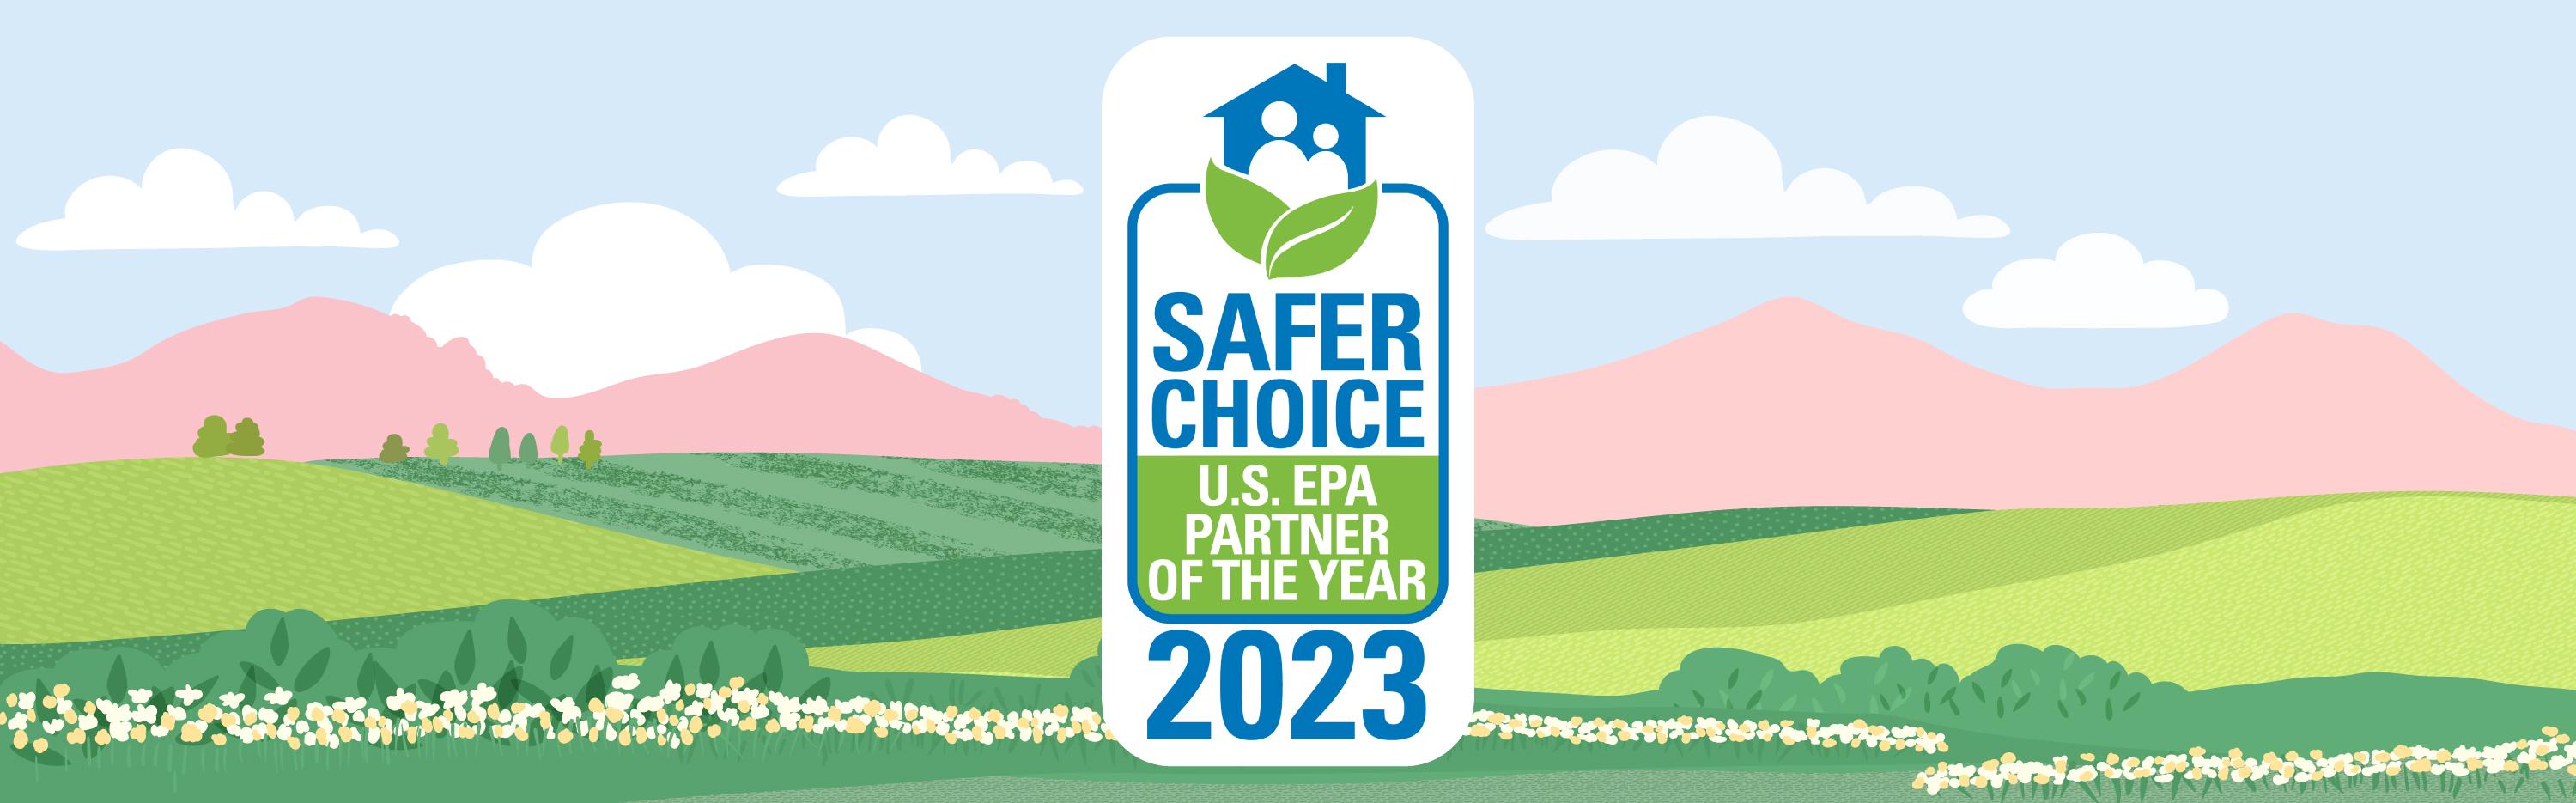 Safer Choice logo in front of mountains and plains